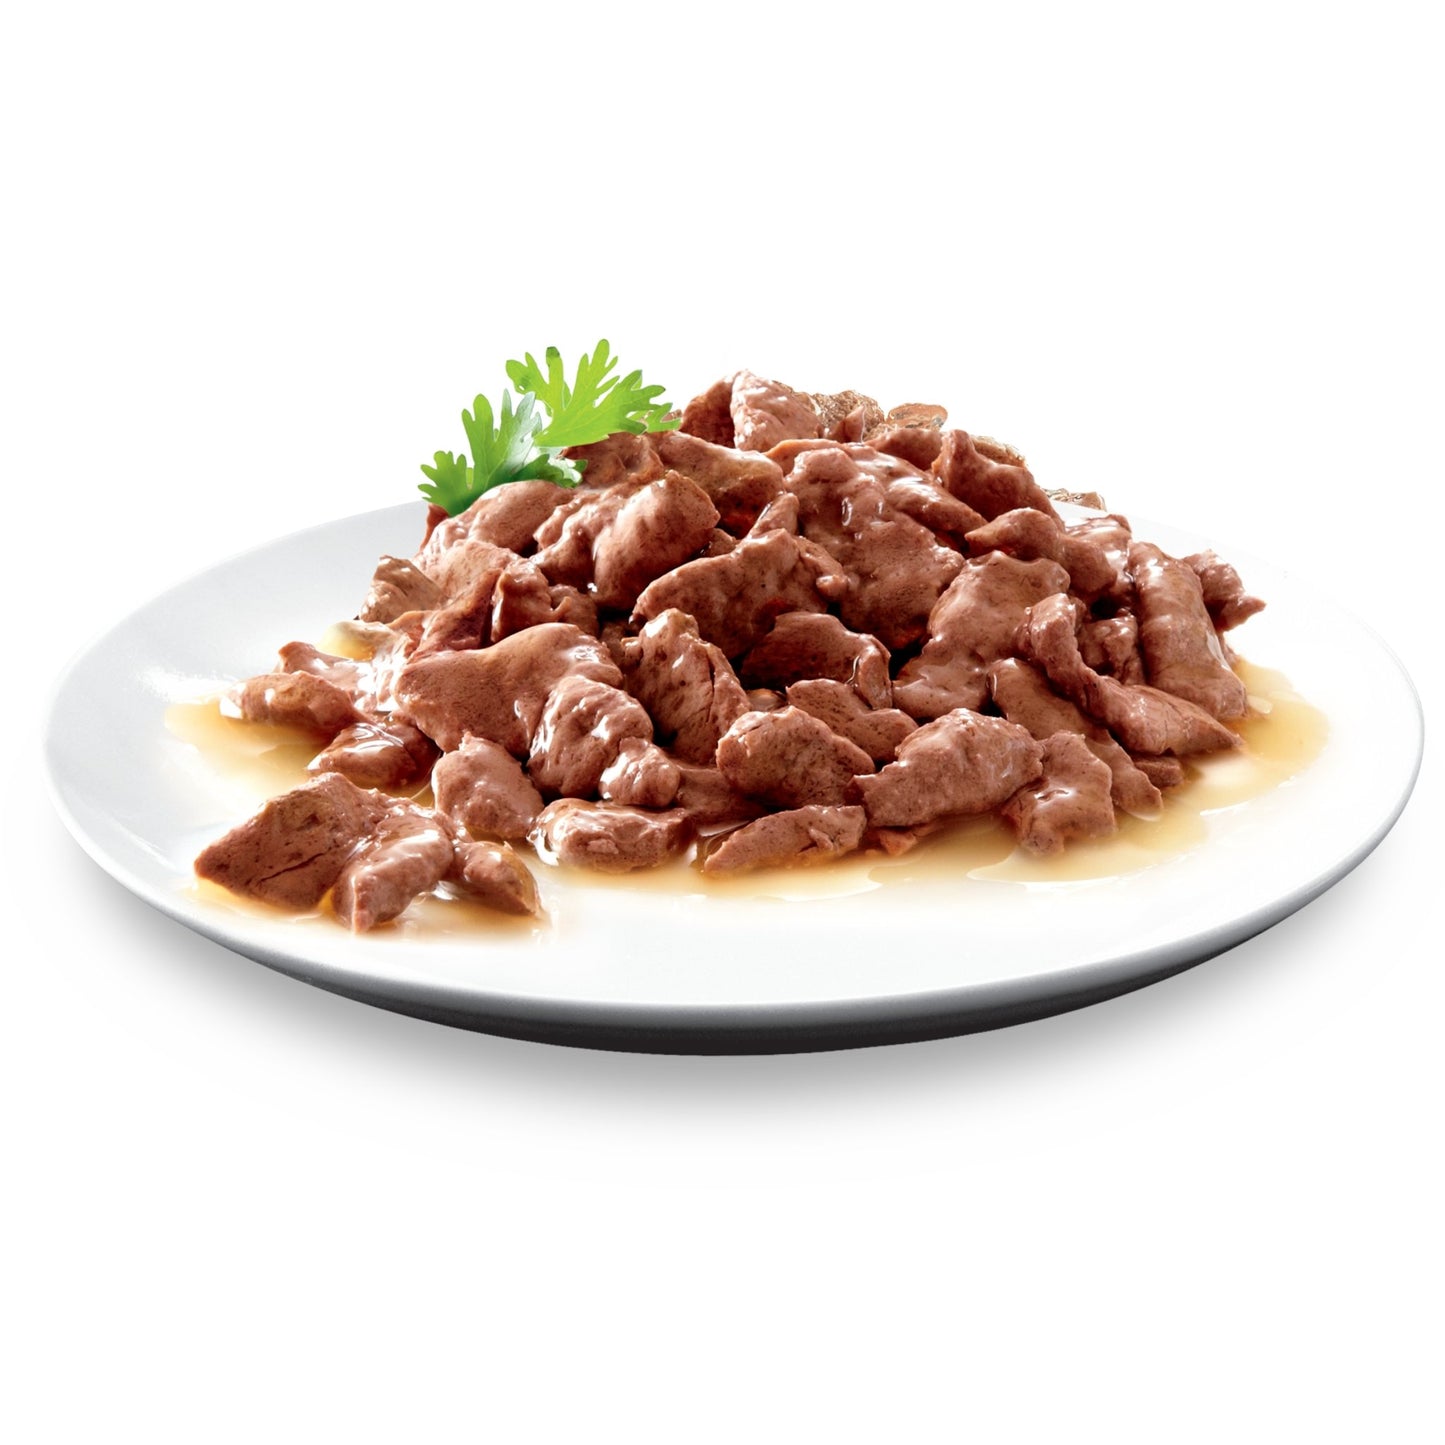 Dine Classic Collection Gravy with Beef - Woonona Petfood & Produce